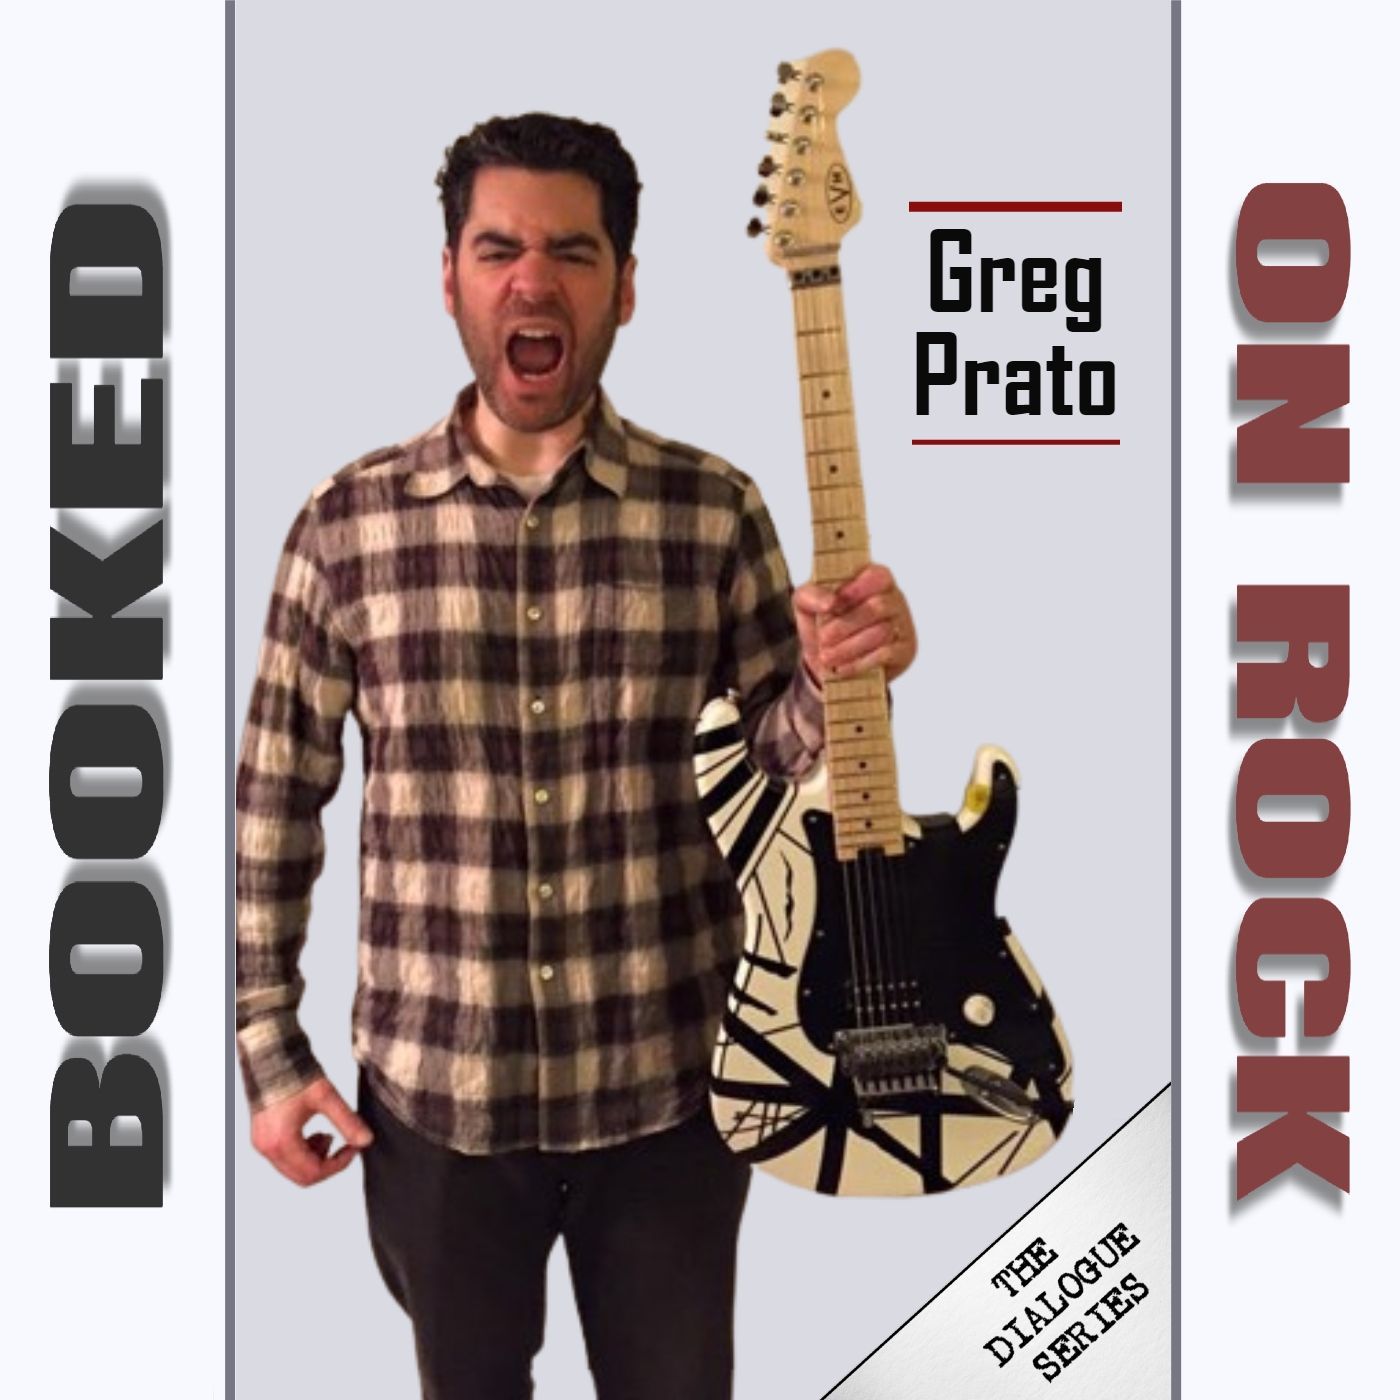 The 10 Albums We Can’t Live Without & More with Author Greg Prato [Episode 175]